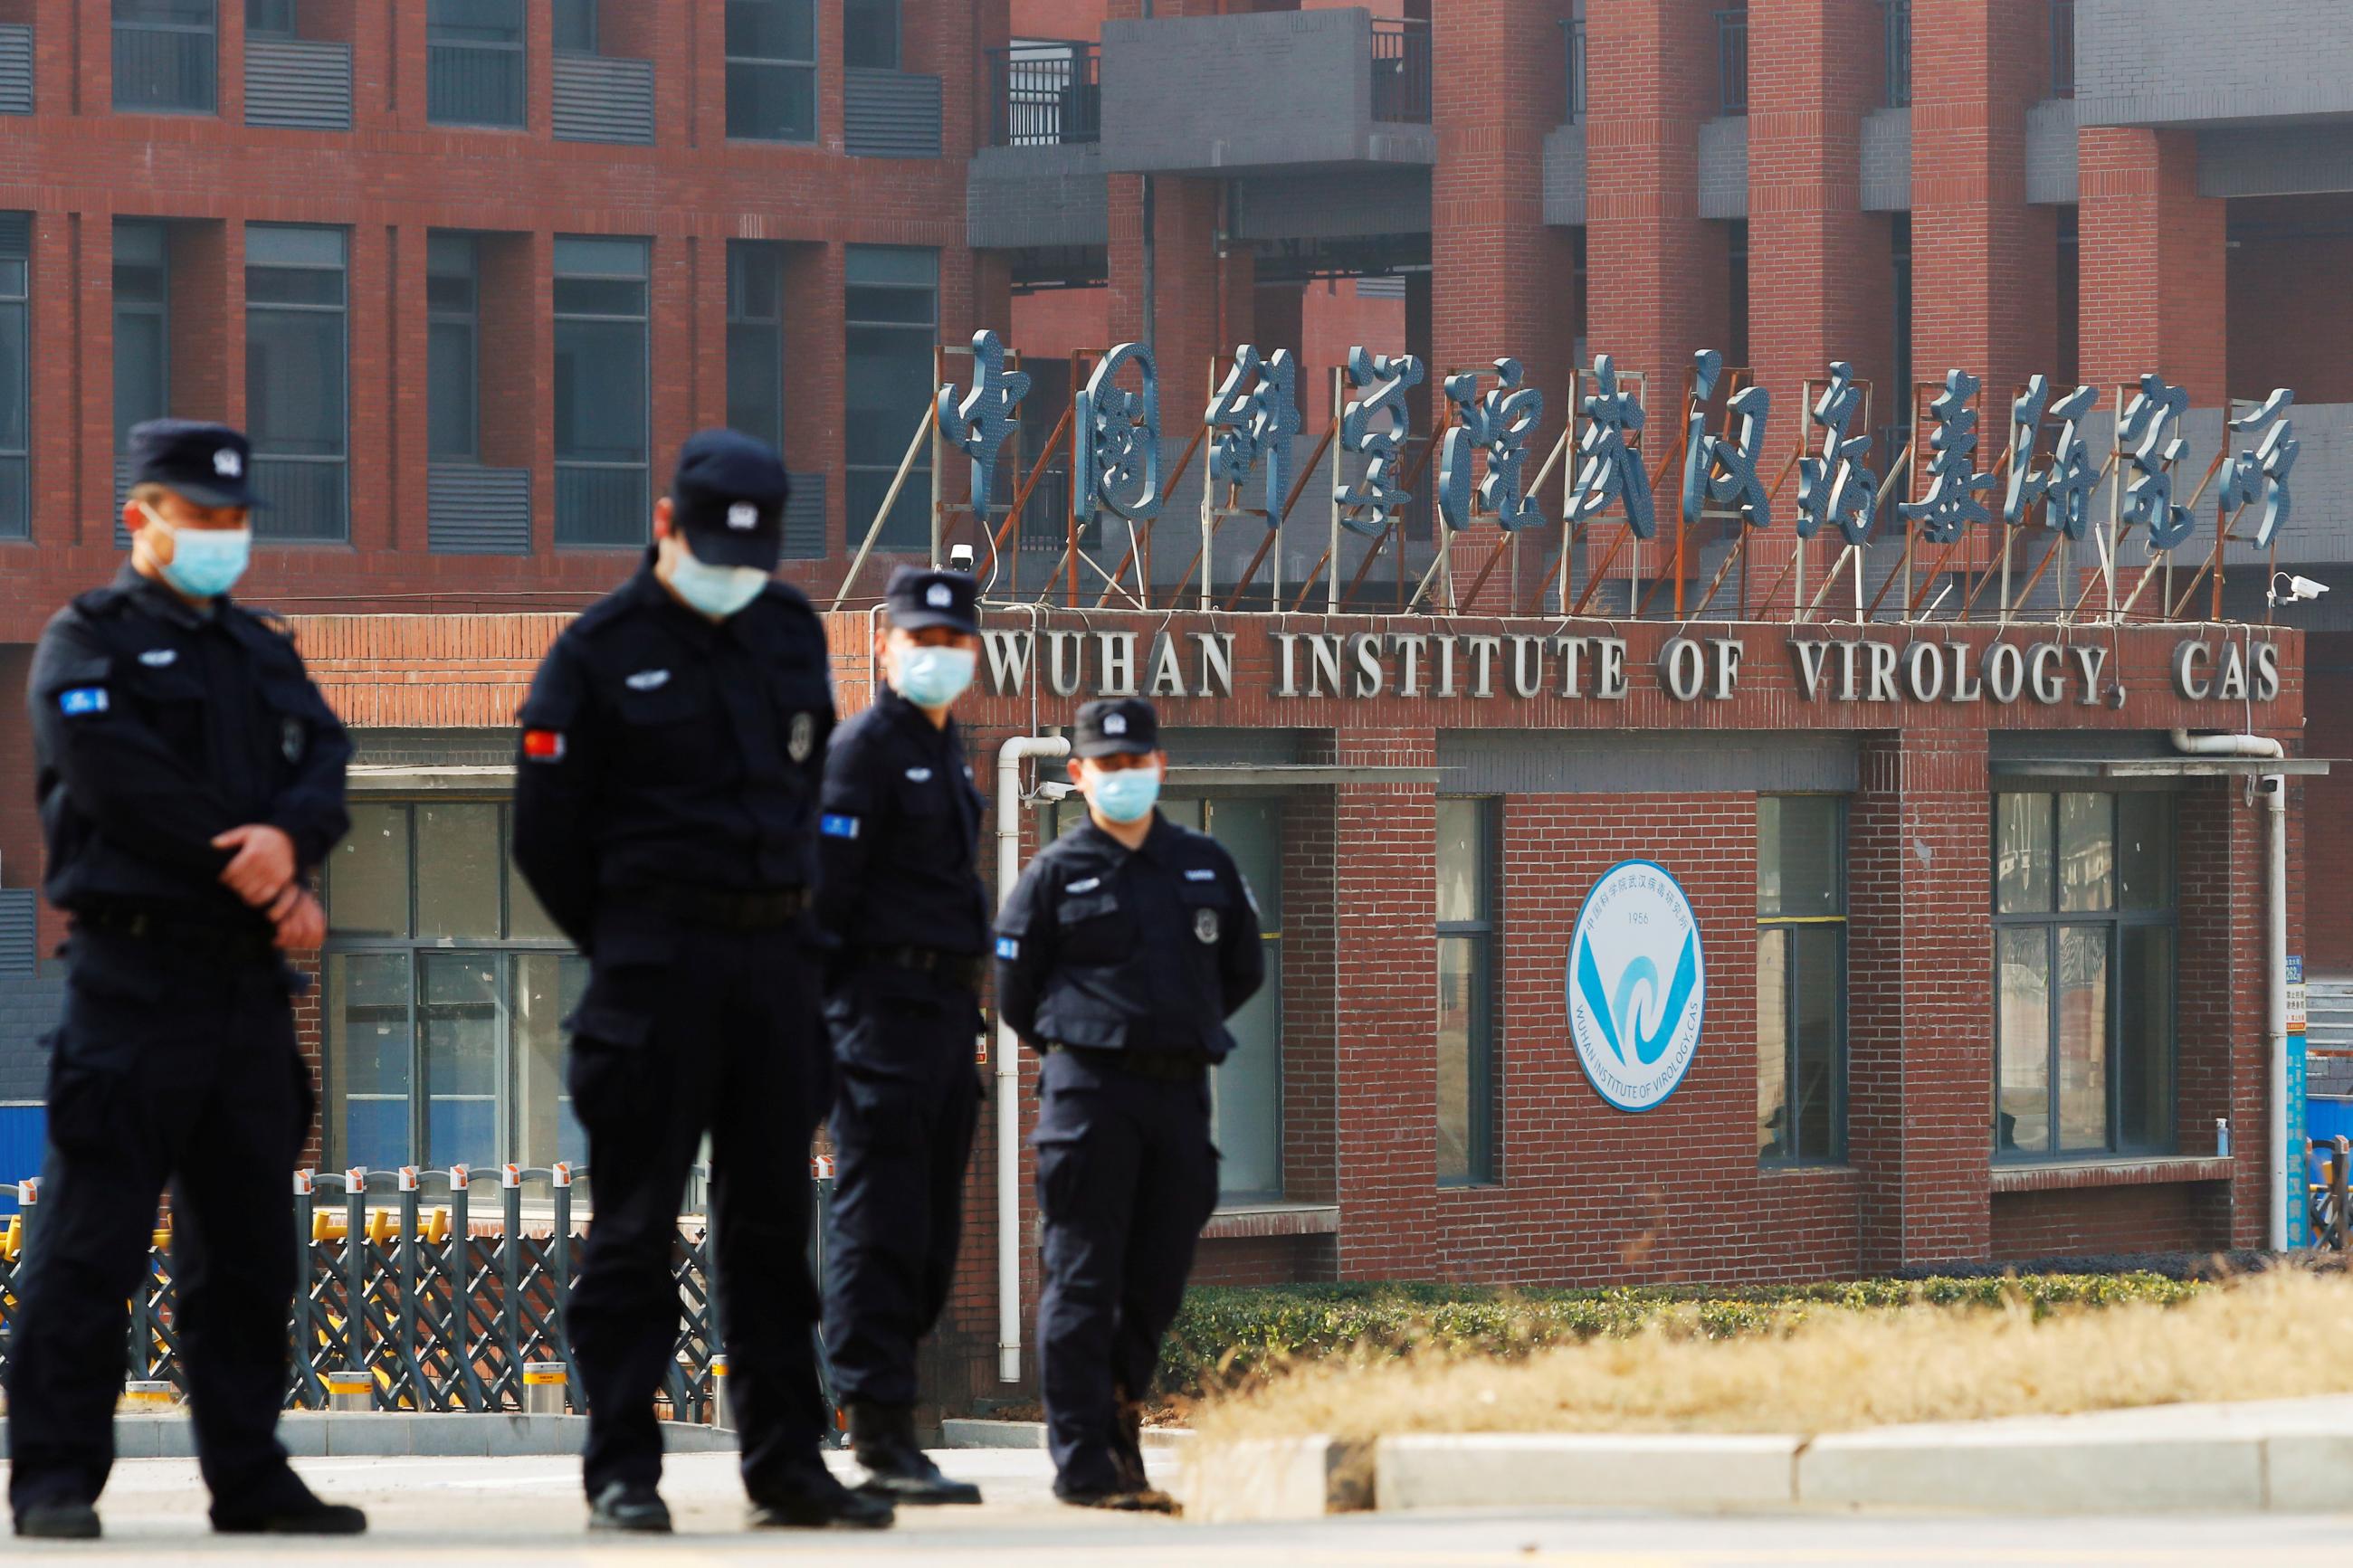 Security personnel keep watch outside Wuhan Institute of Virology during the visit by the World Health Organization (WHO) team tasked with investigating the origins of the coronavirus disease (COVID-19), in Wuhan, Hubei province, China February 3, 2021.